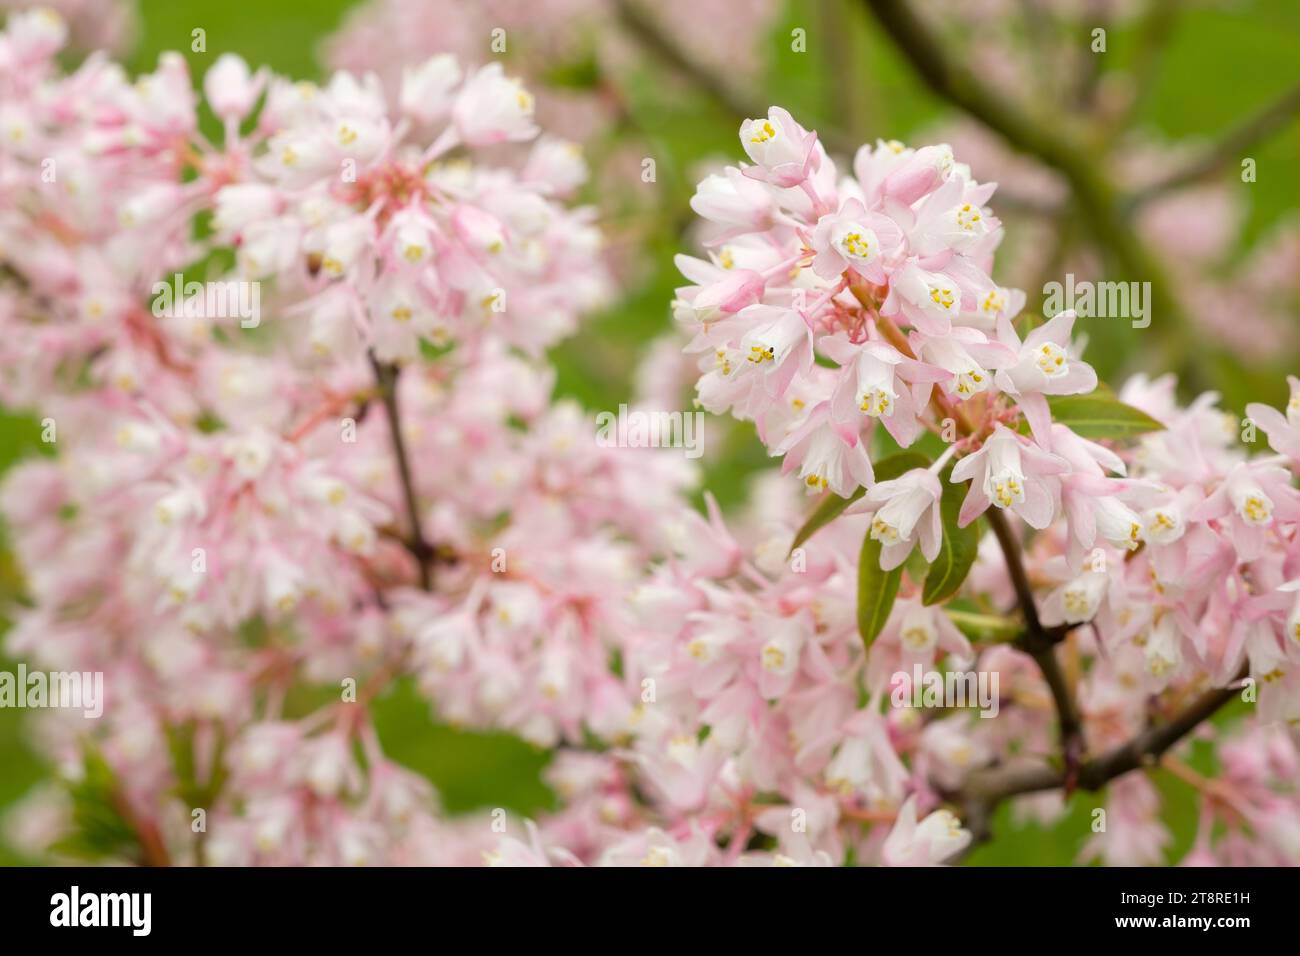 Staphylea holocarpa Rosea, Chinese Bladdernut, clusters of pale-pink flowers in spring Stock Photo